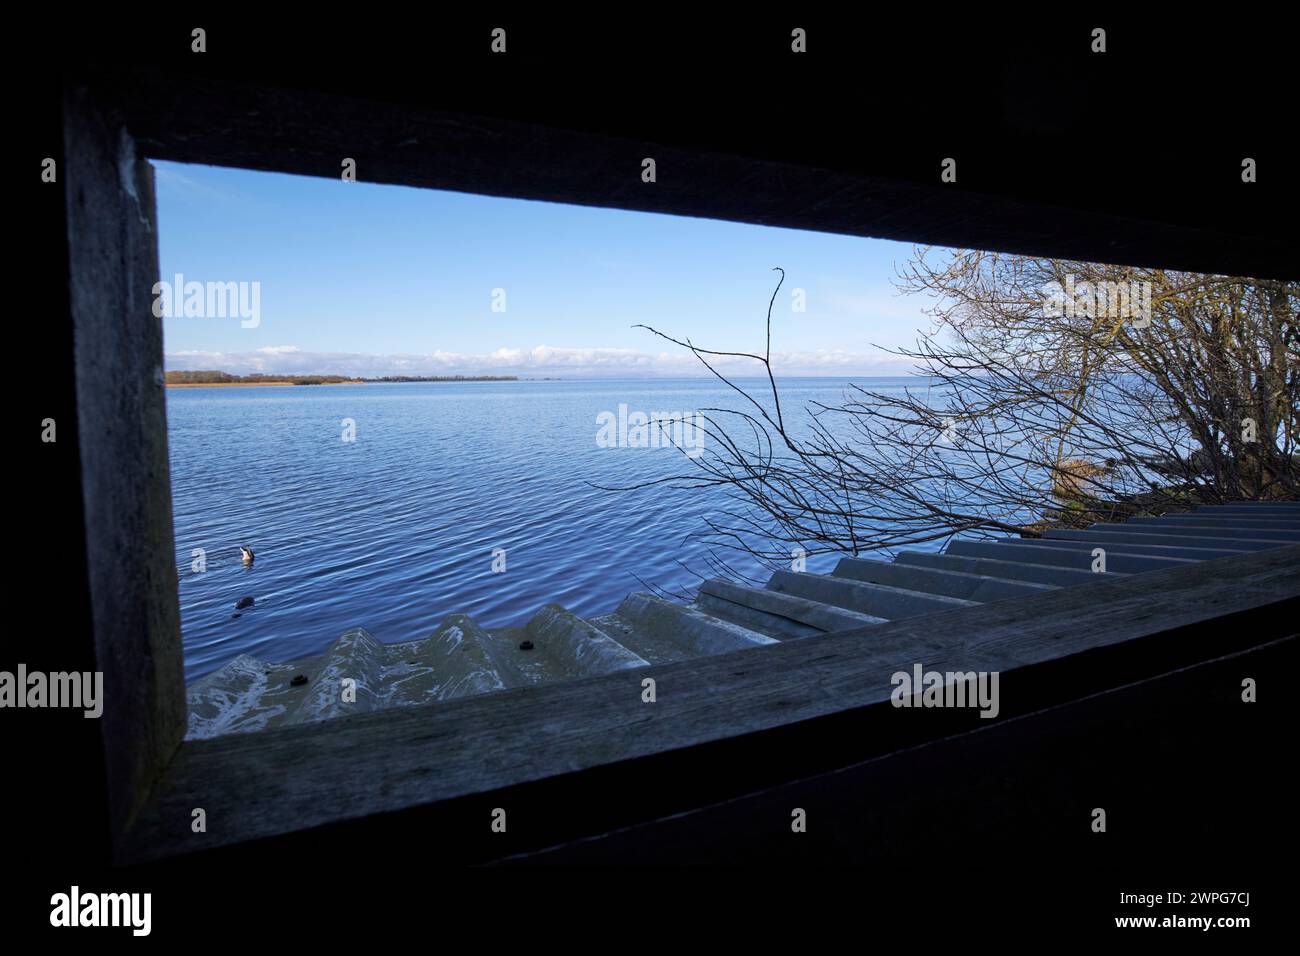 looking out through wildlife birdwatching hide on lough neagh shoreline oxford island county armagh northern ireland uk Stock Photo